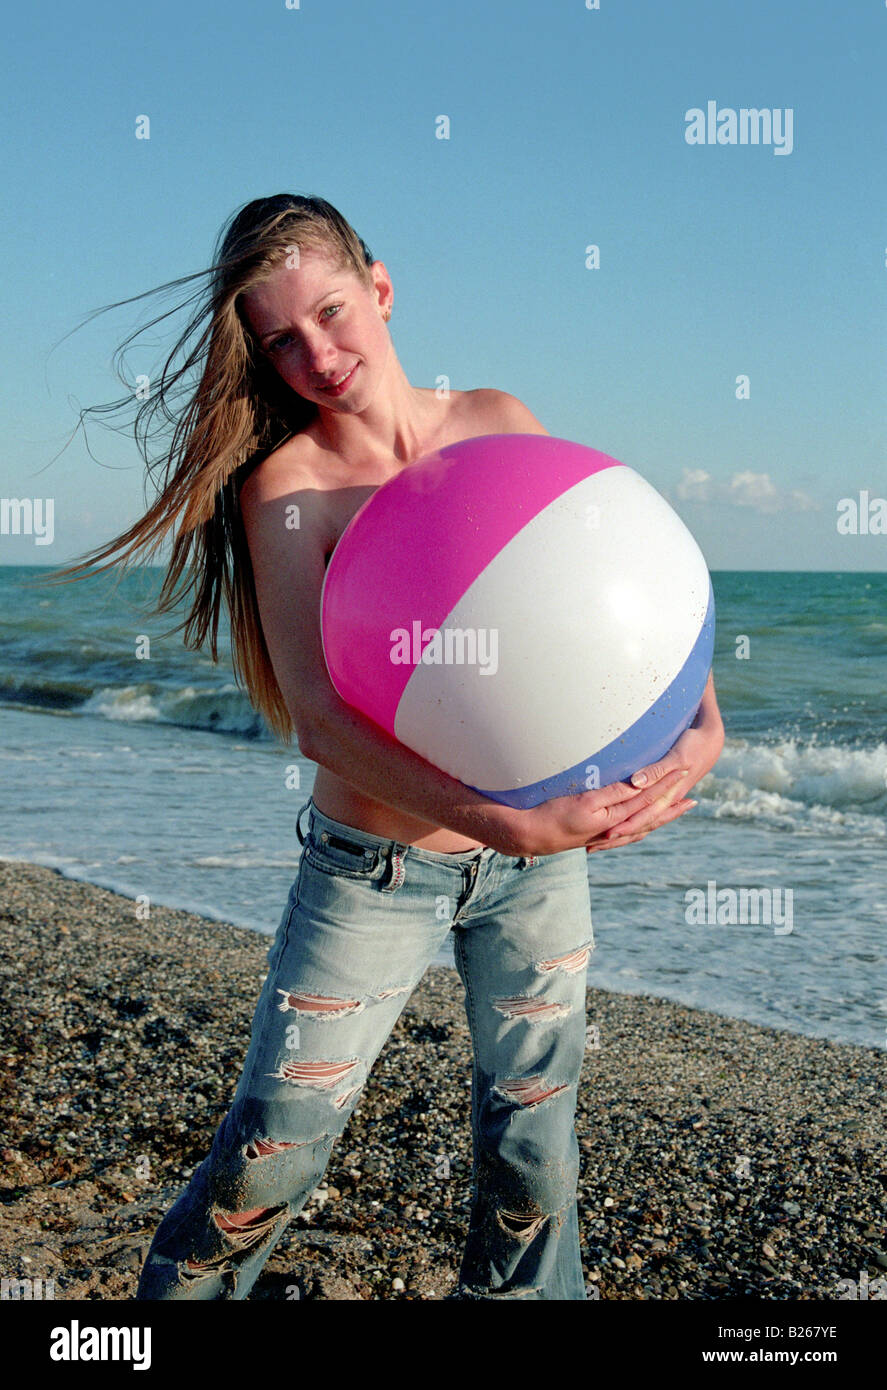 shirtless woman play with ball on a beach Stock Photo